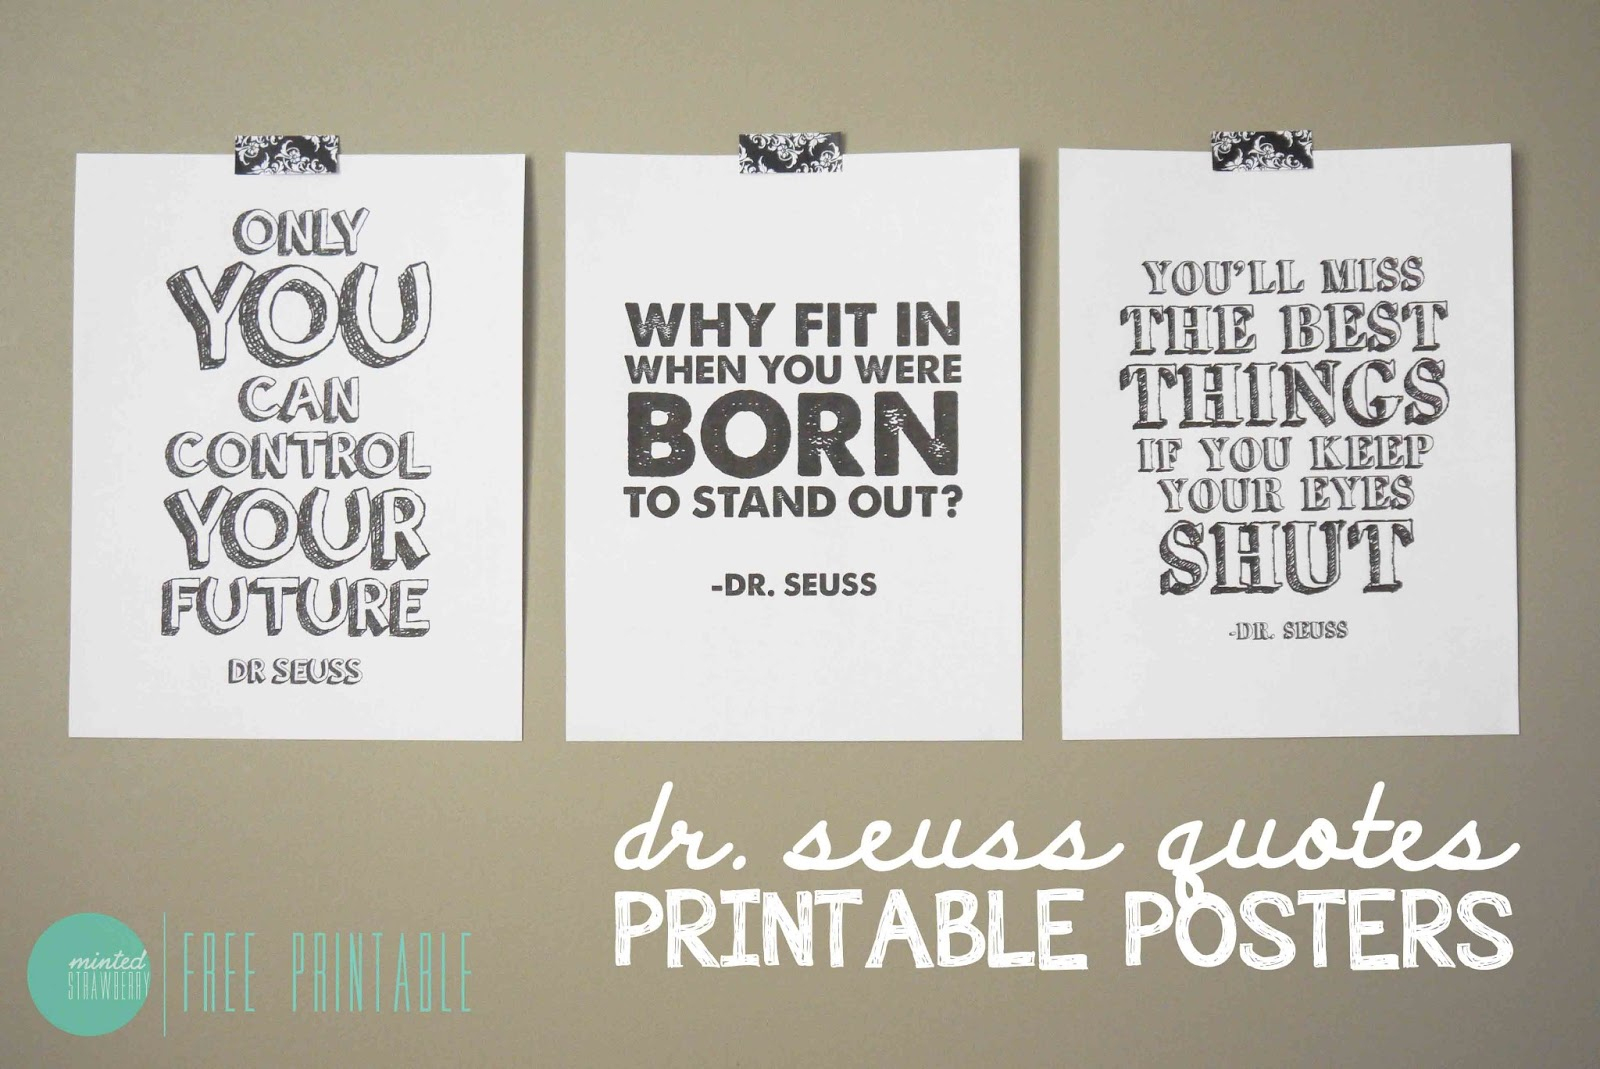 Free Printable: Dr. Seuss Quote Posters - Minted Strawberry - Free Printable Posters